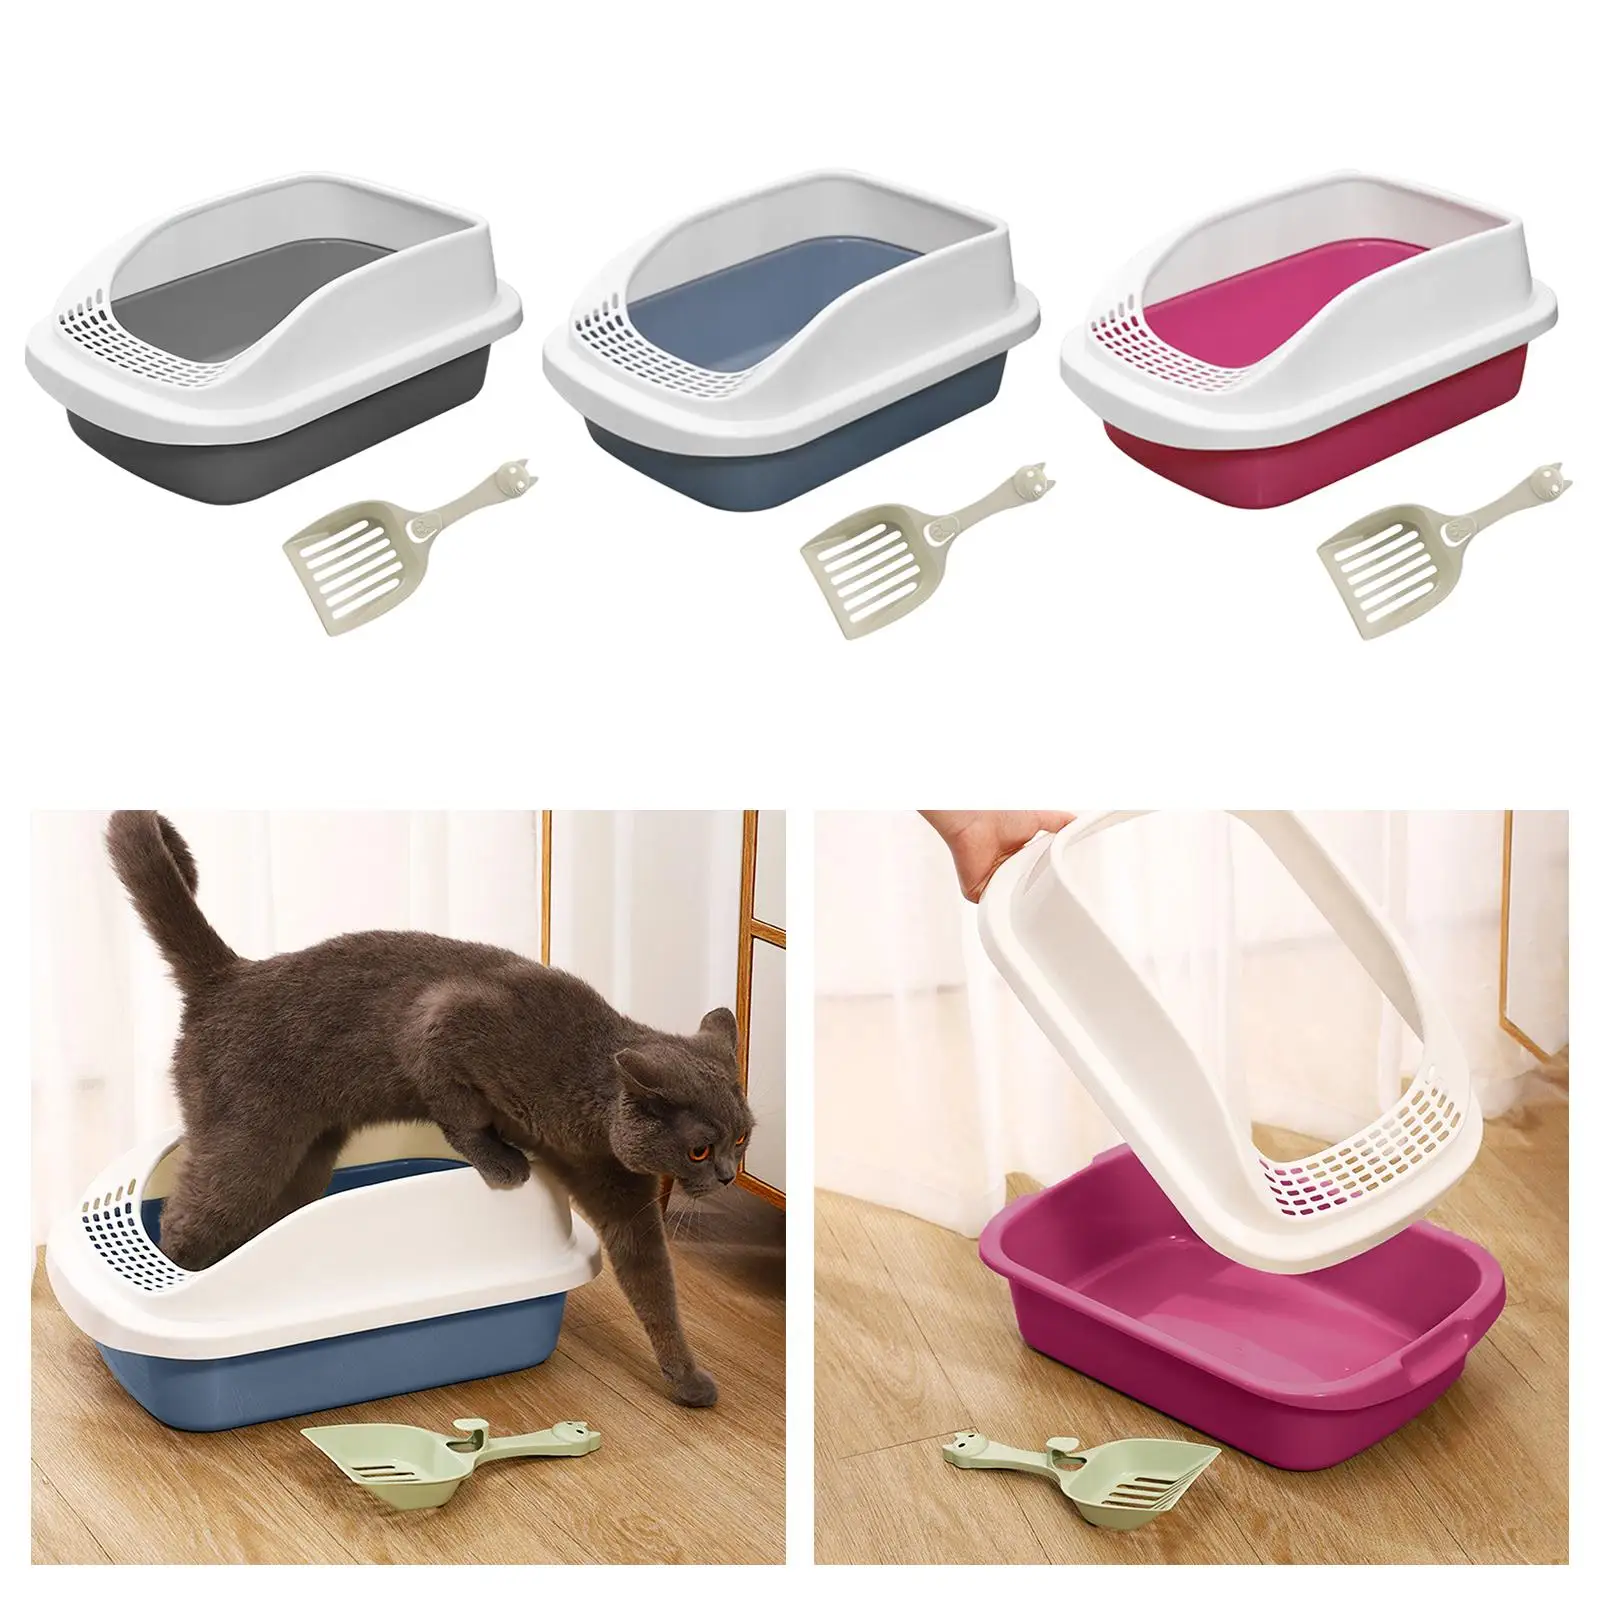 Cat Litter Box Pets Litter Trays Litter Pan Potty Toilet for Kitten Hamsters Small and Medium Cats Indoor Cats Small Animals